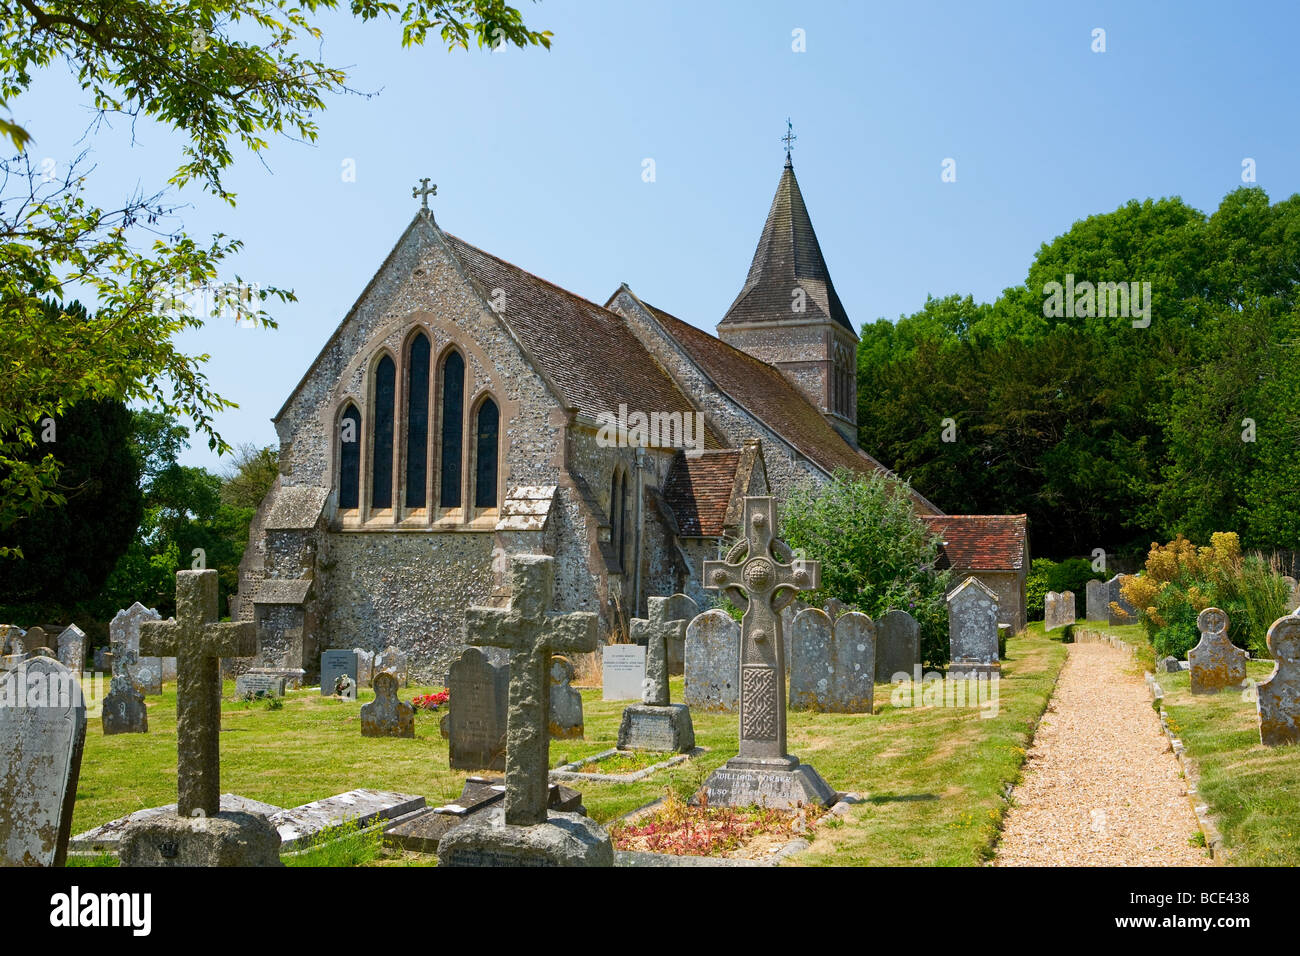 St Mary’s Church (anglican) Slindon village, West Sussex, Royaume-Uni Banque D'Images